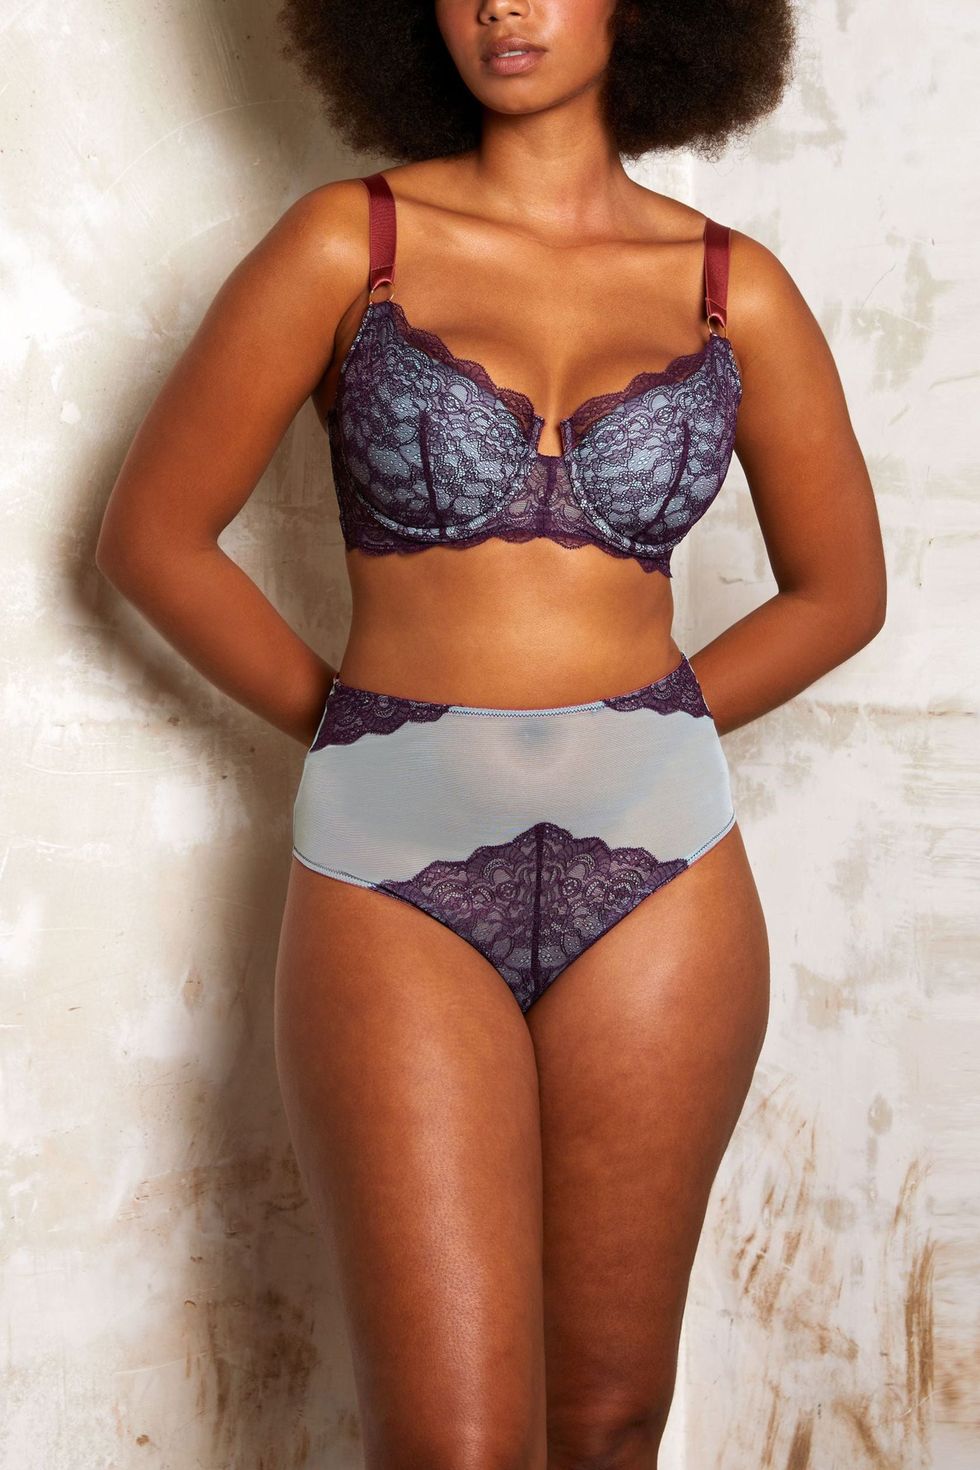 13 Lingerie Brands That Offer a Repairs Service (+ Alternatives)